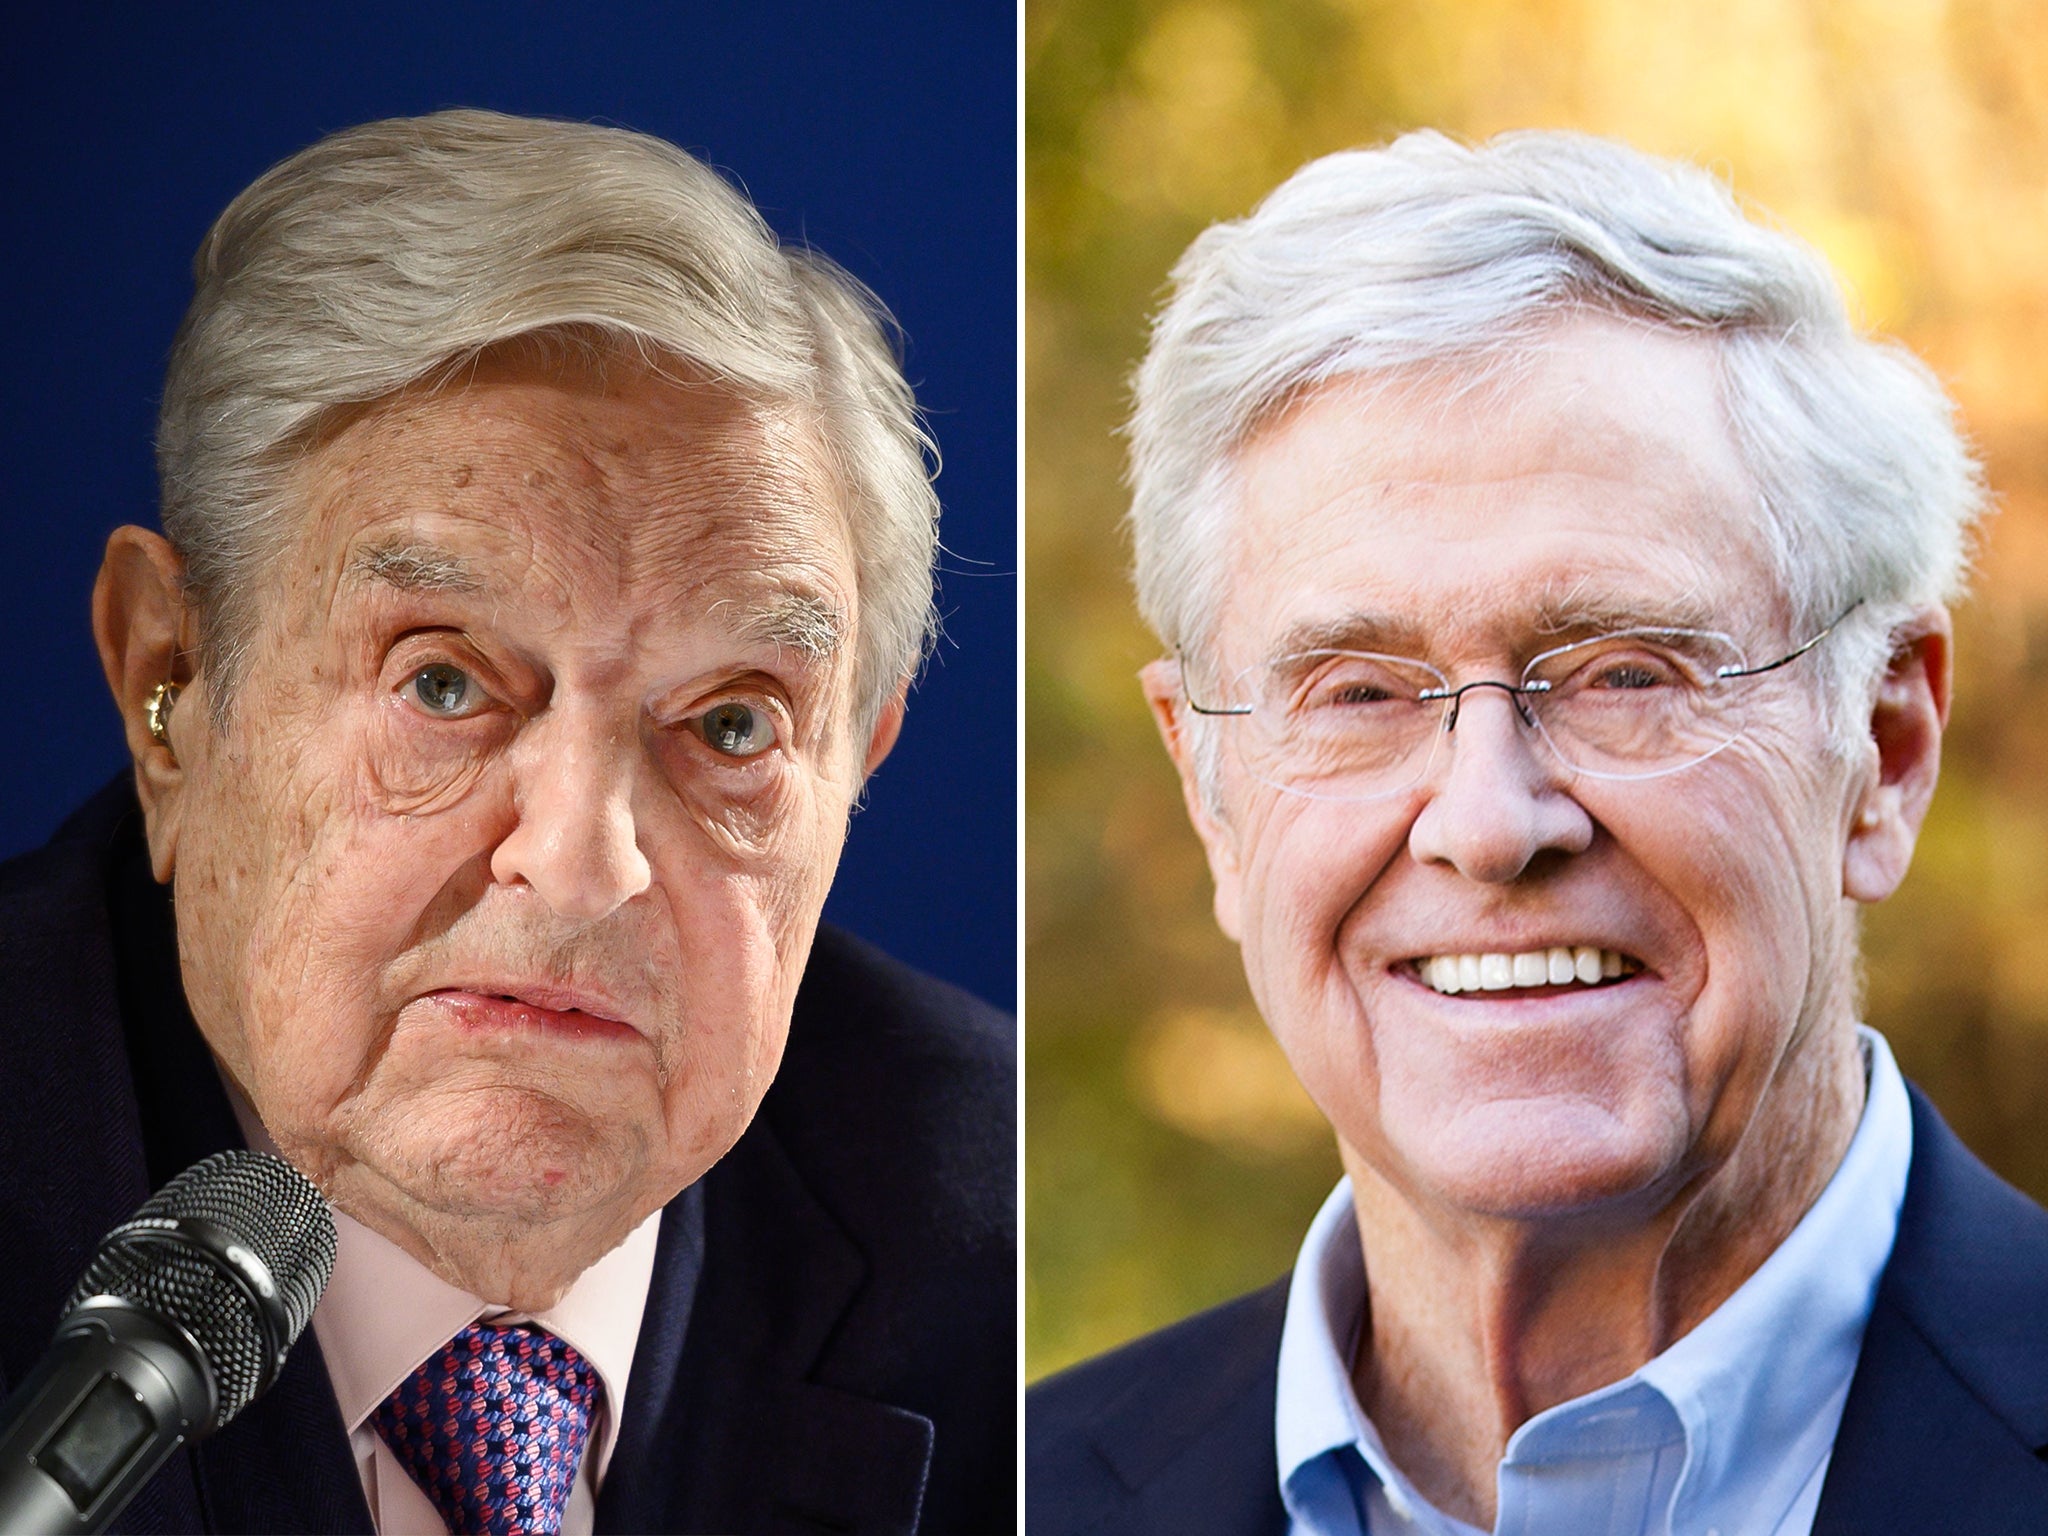 George Soros (L) and Charles Koch (R) have joined forces to launch a think tank